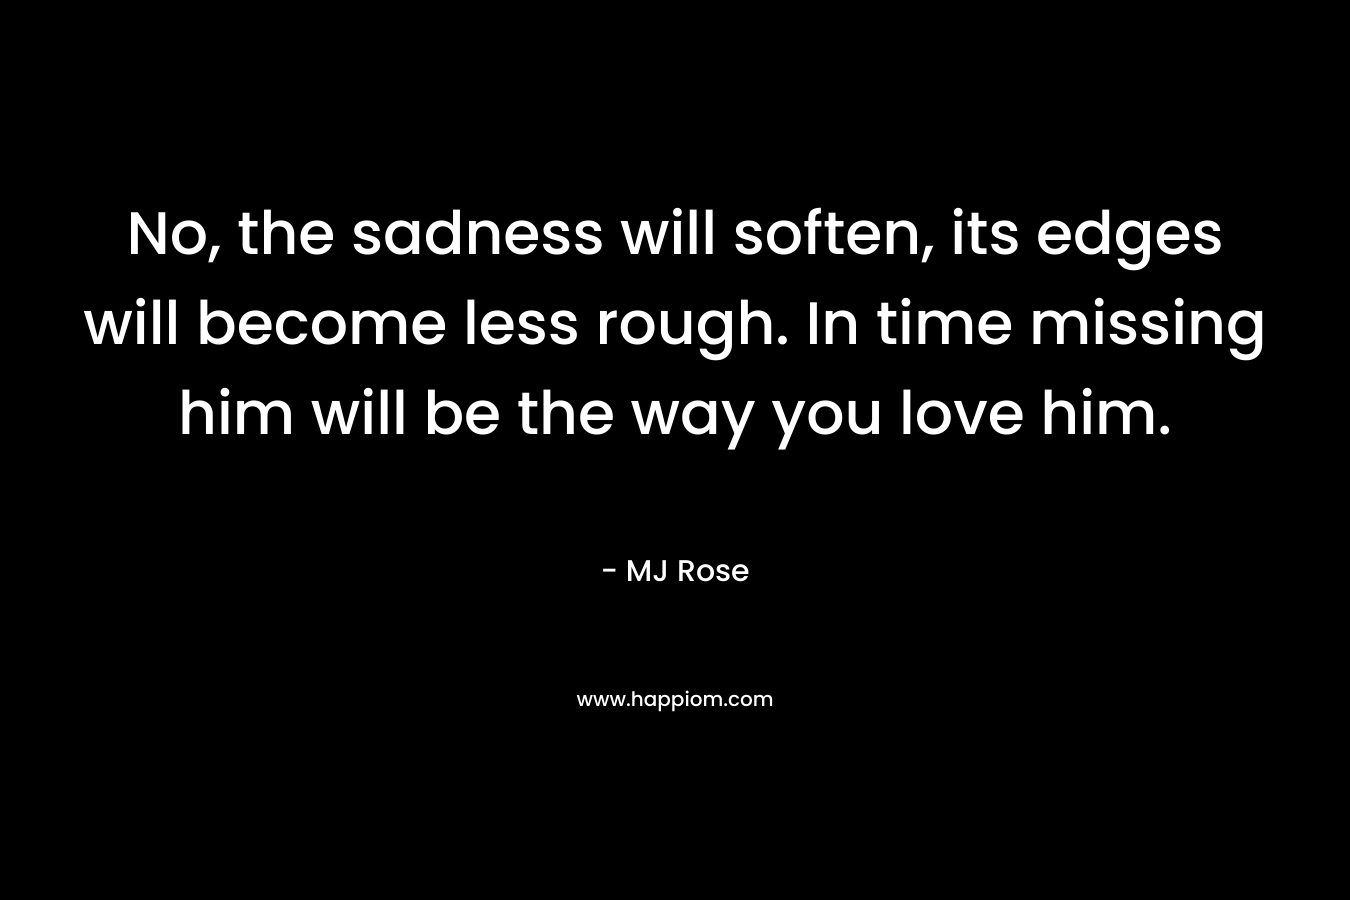 No, the sadness will soften, its edges will become less rough. In time missing him will be the way you love him. – MJ Rose